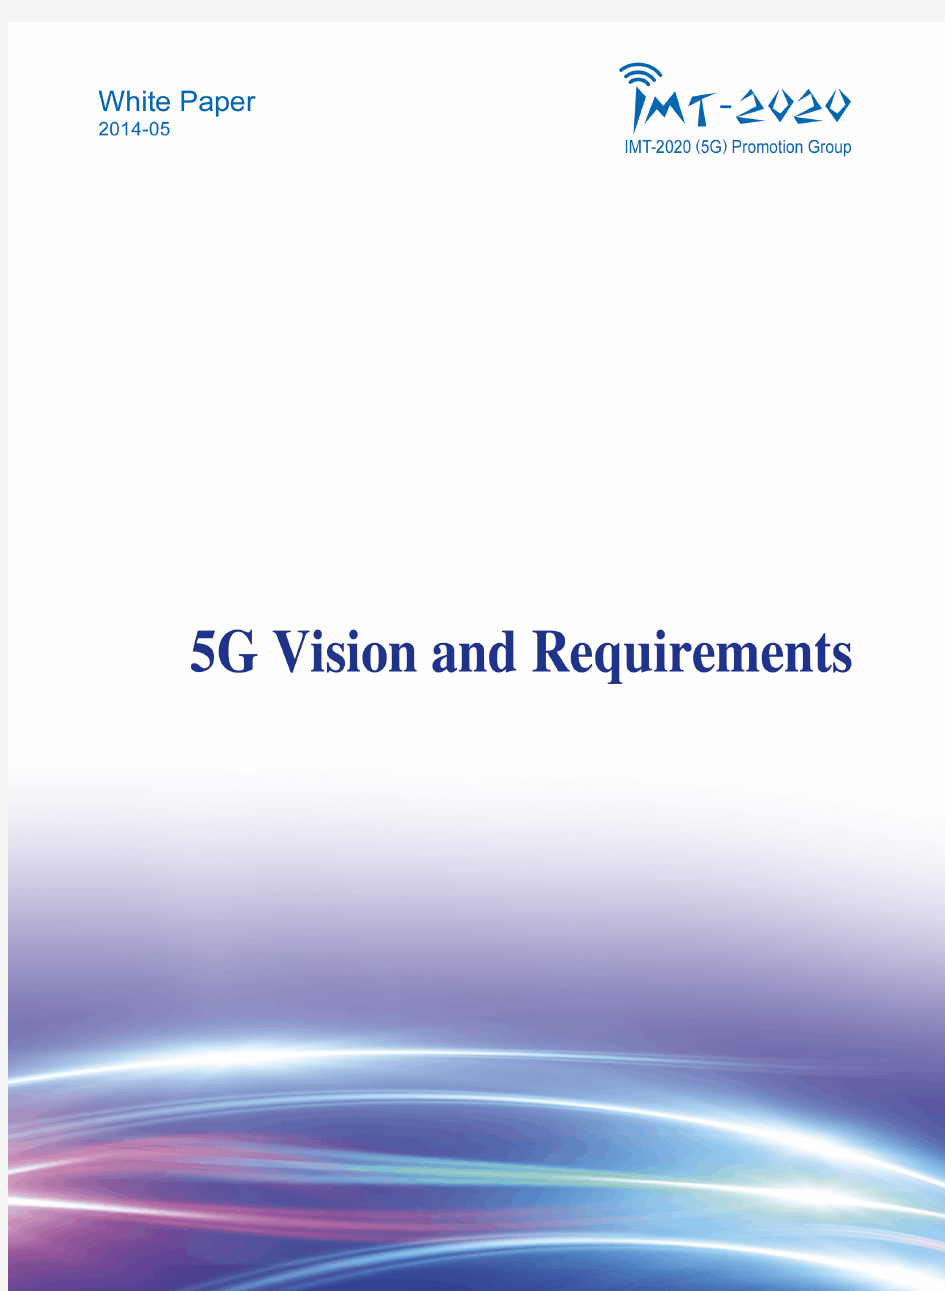 IMT-2020(5G)PG-WHITE PAPER ON 5G VISION AND REQUIREMENTS_V1.0